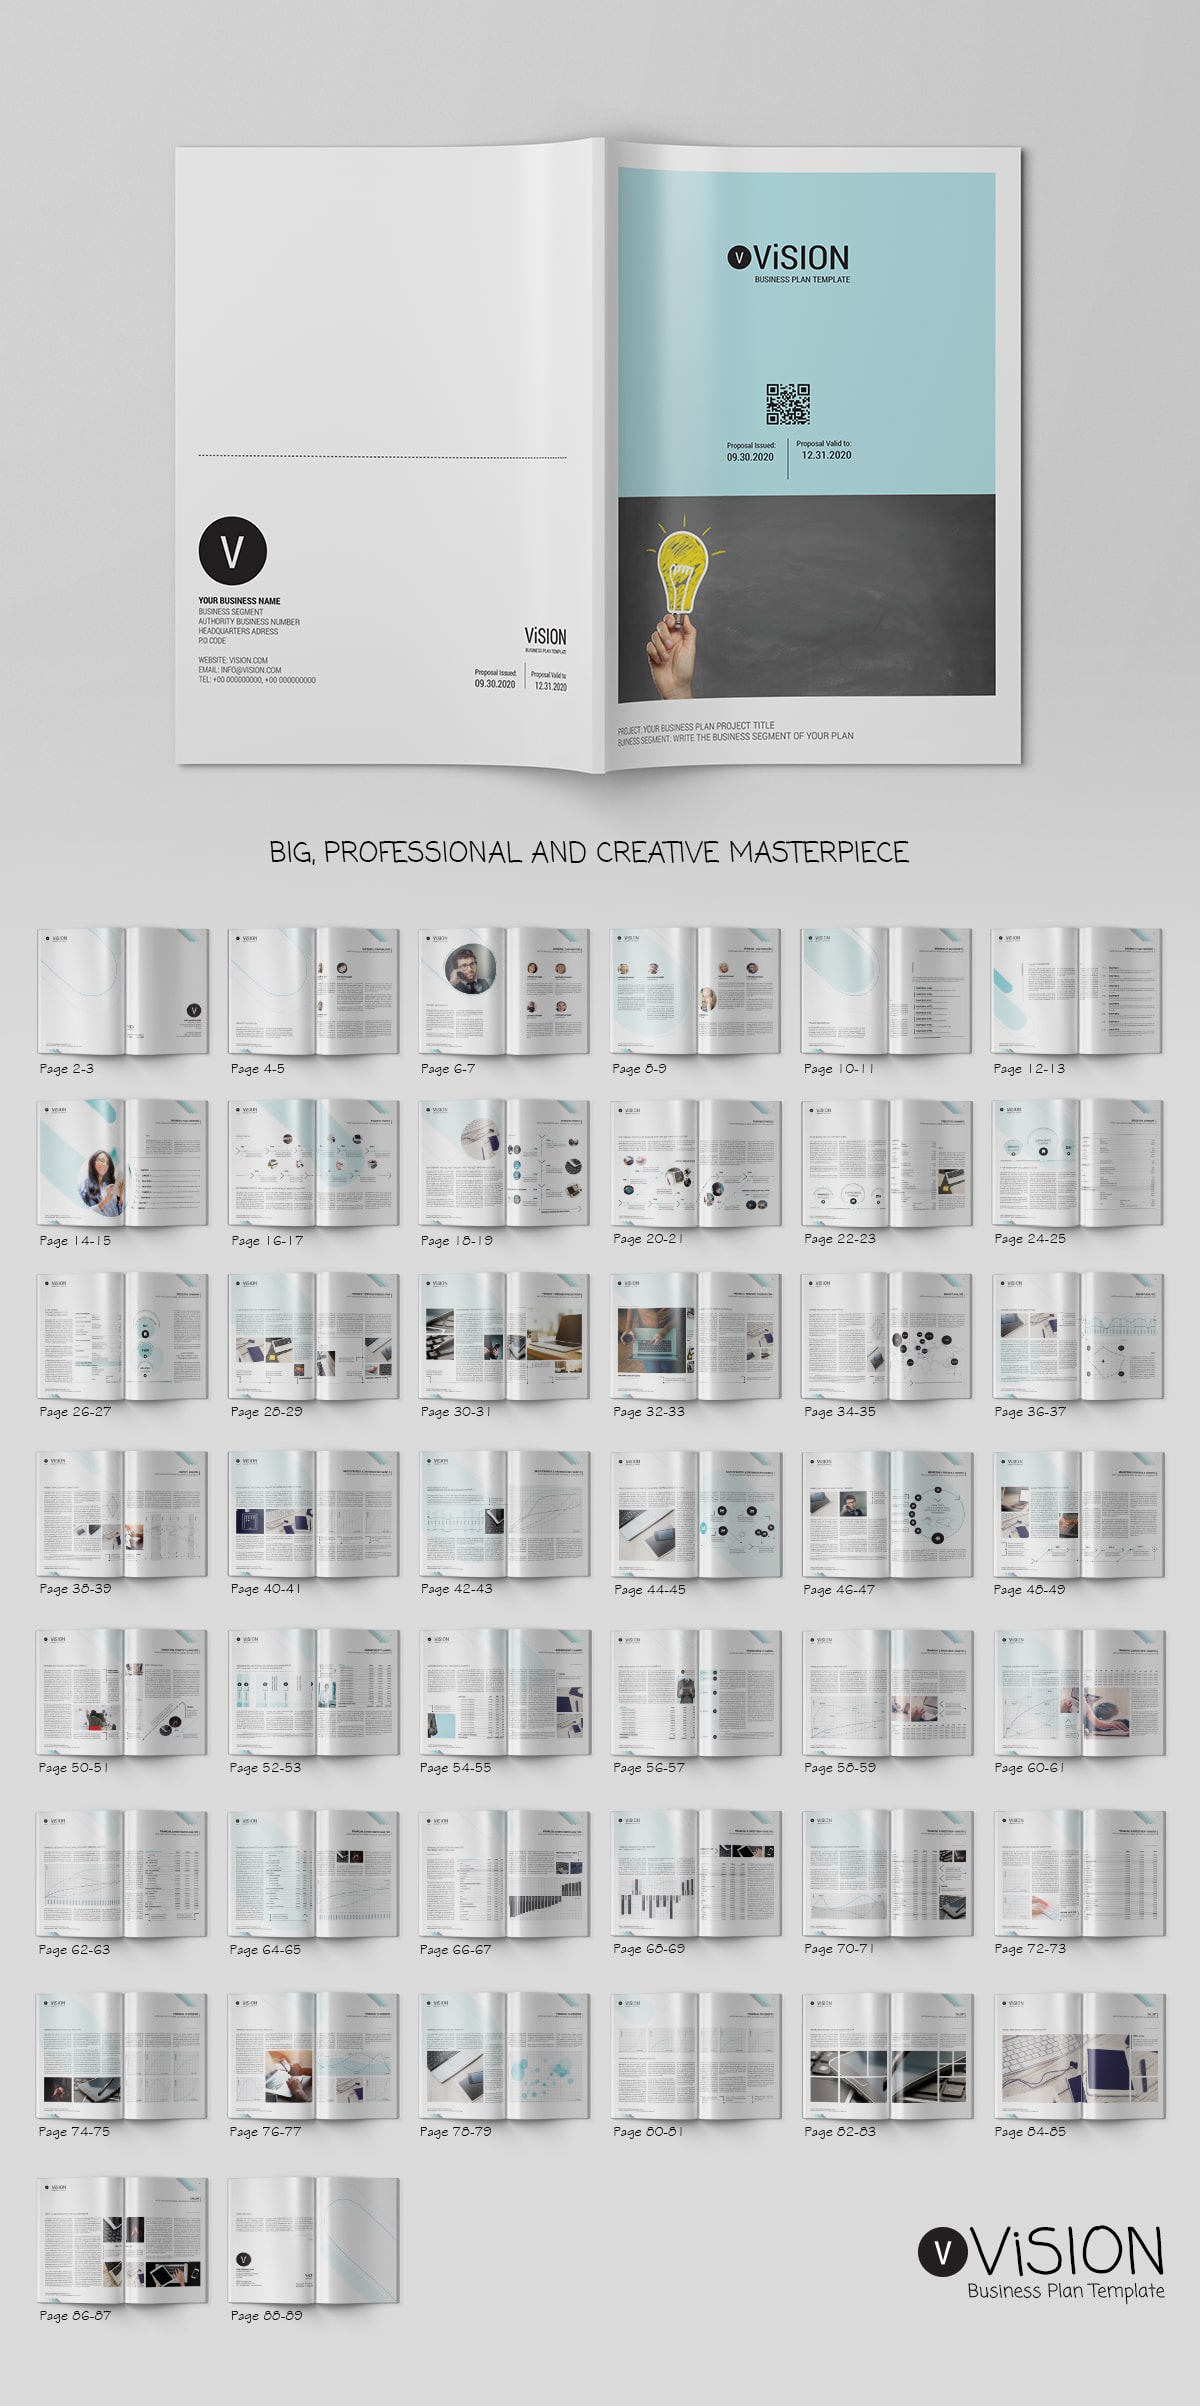 ViSION Business Plan Template for Adobe inDesign and Microsoft Word